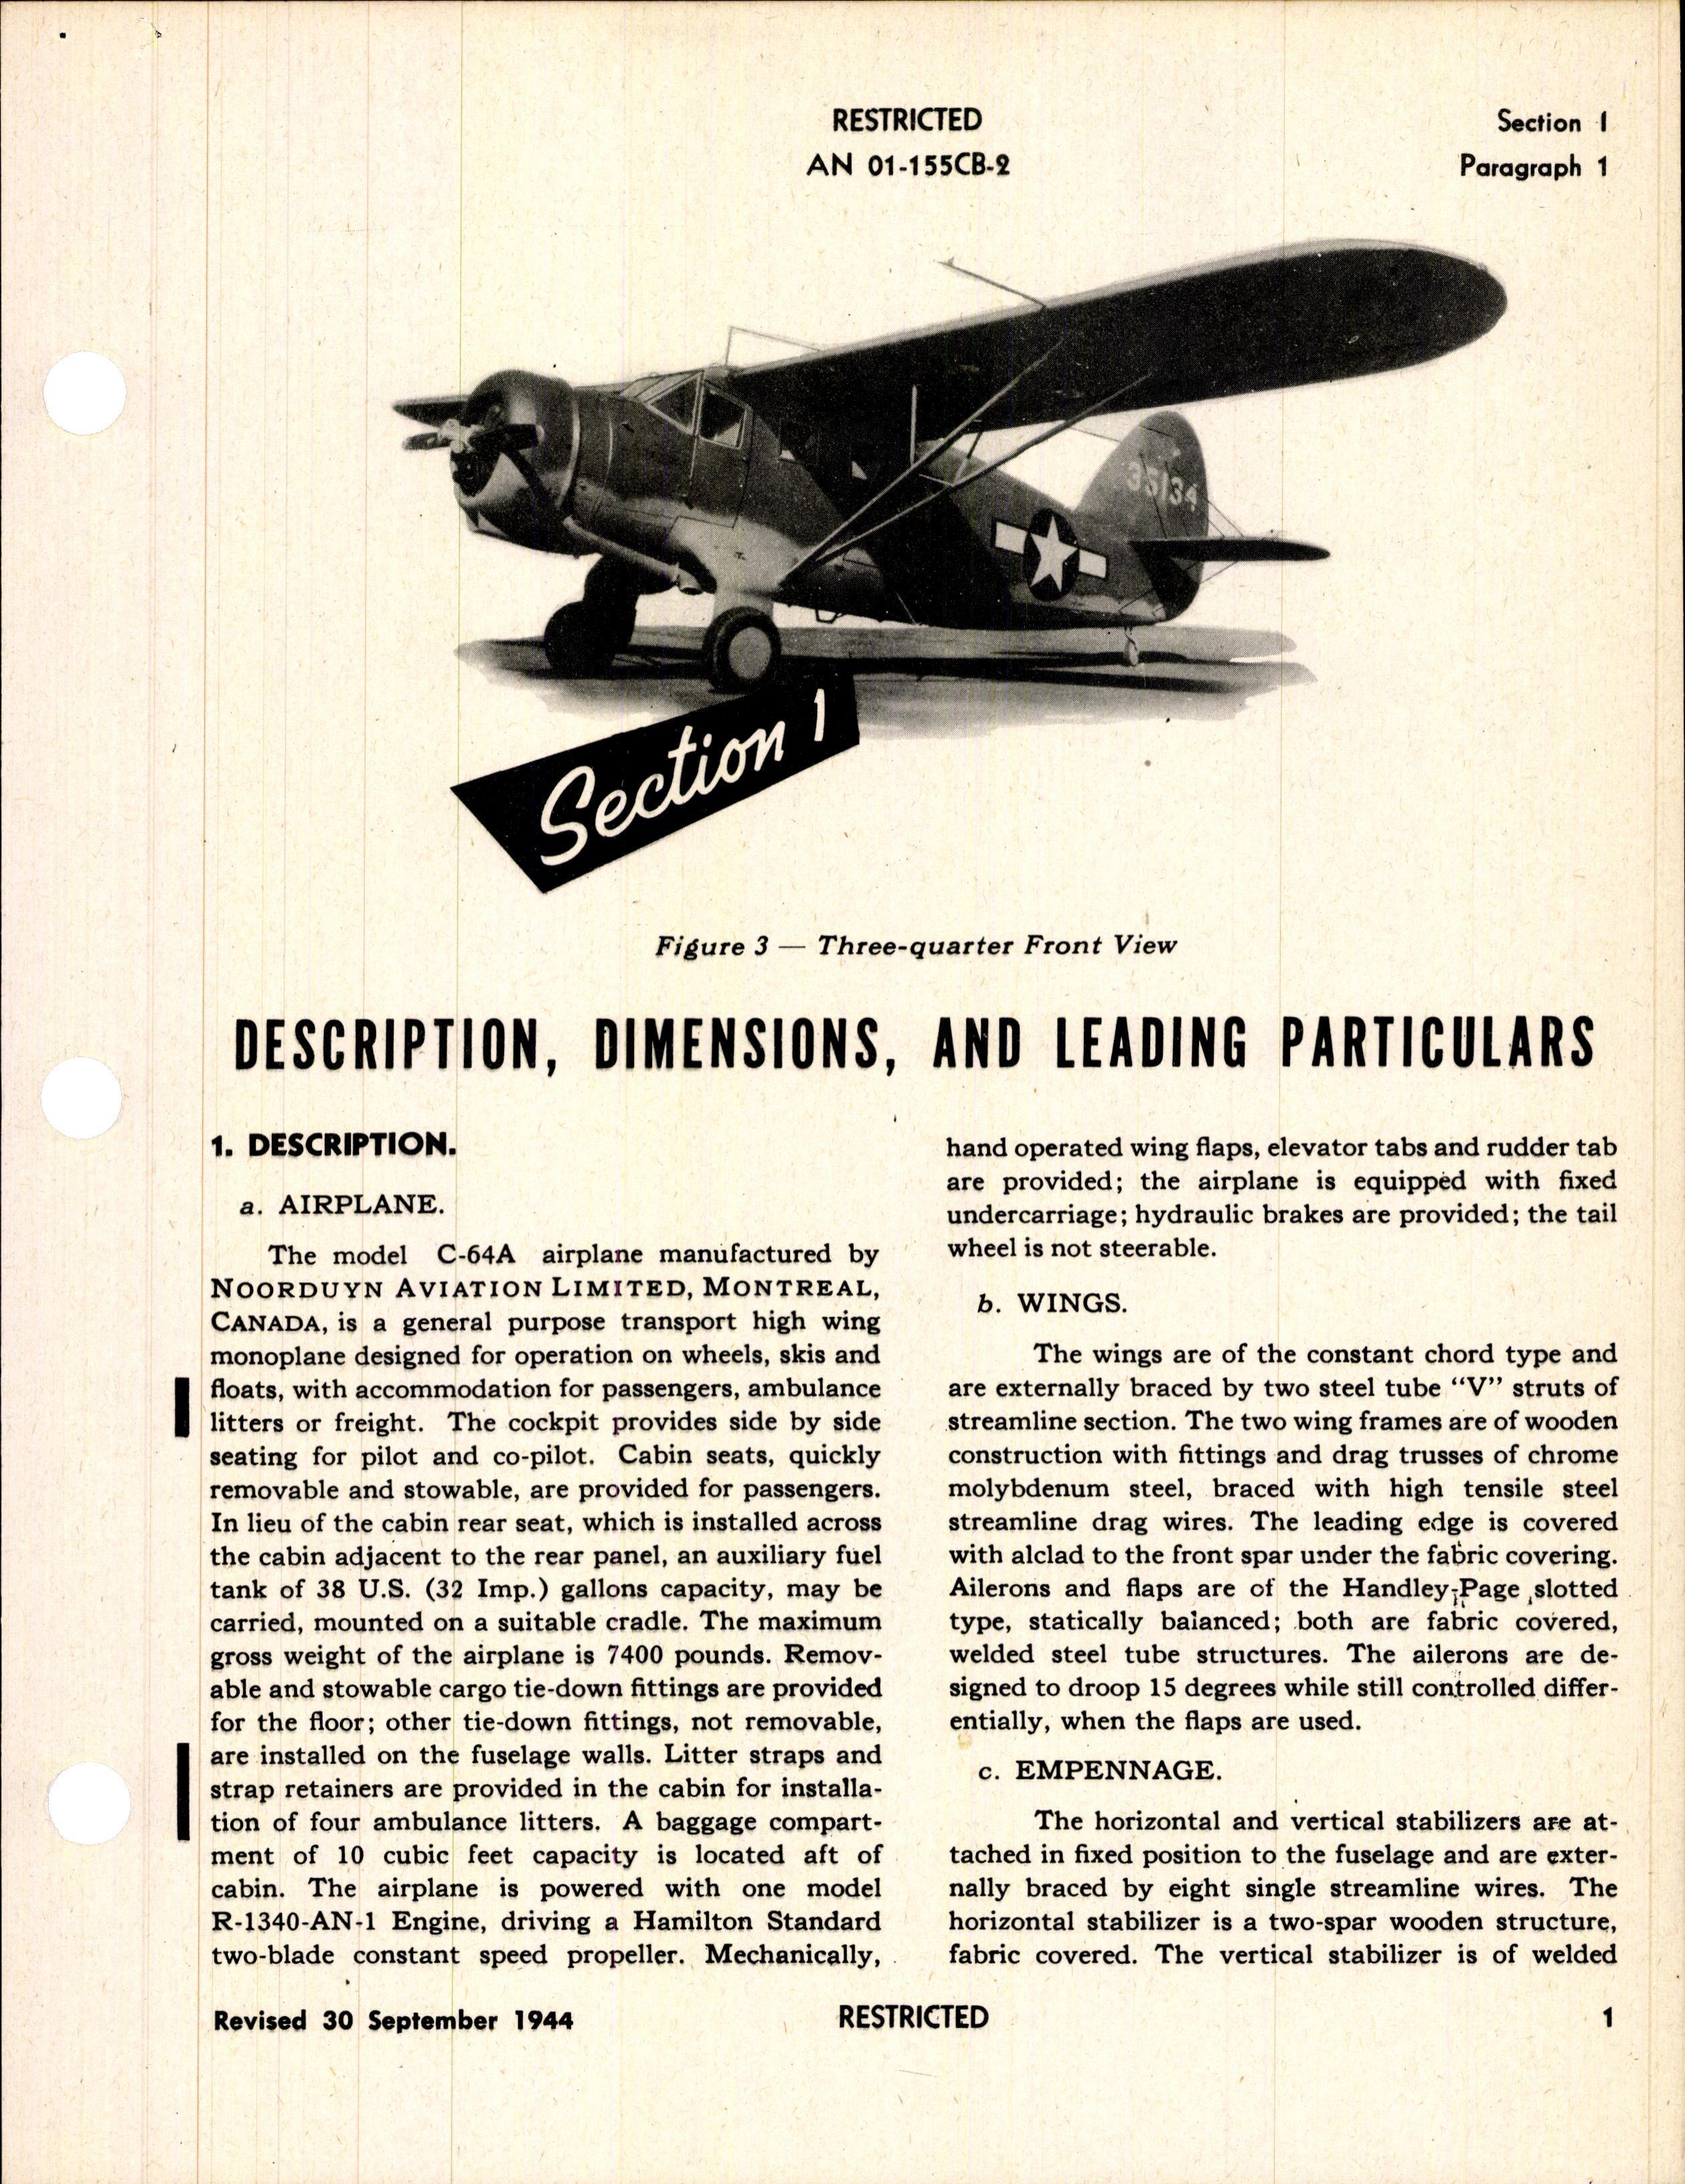 Sample page 5 from AirCorps Library document: Erection and Maintenance Instructions for C-64A